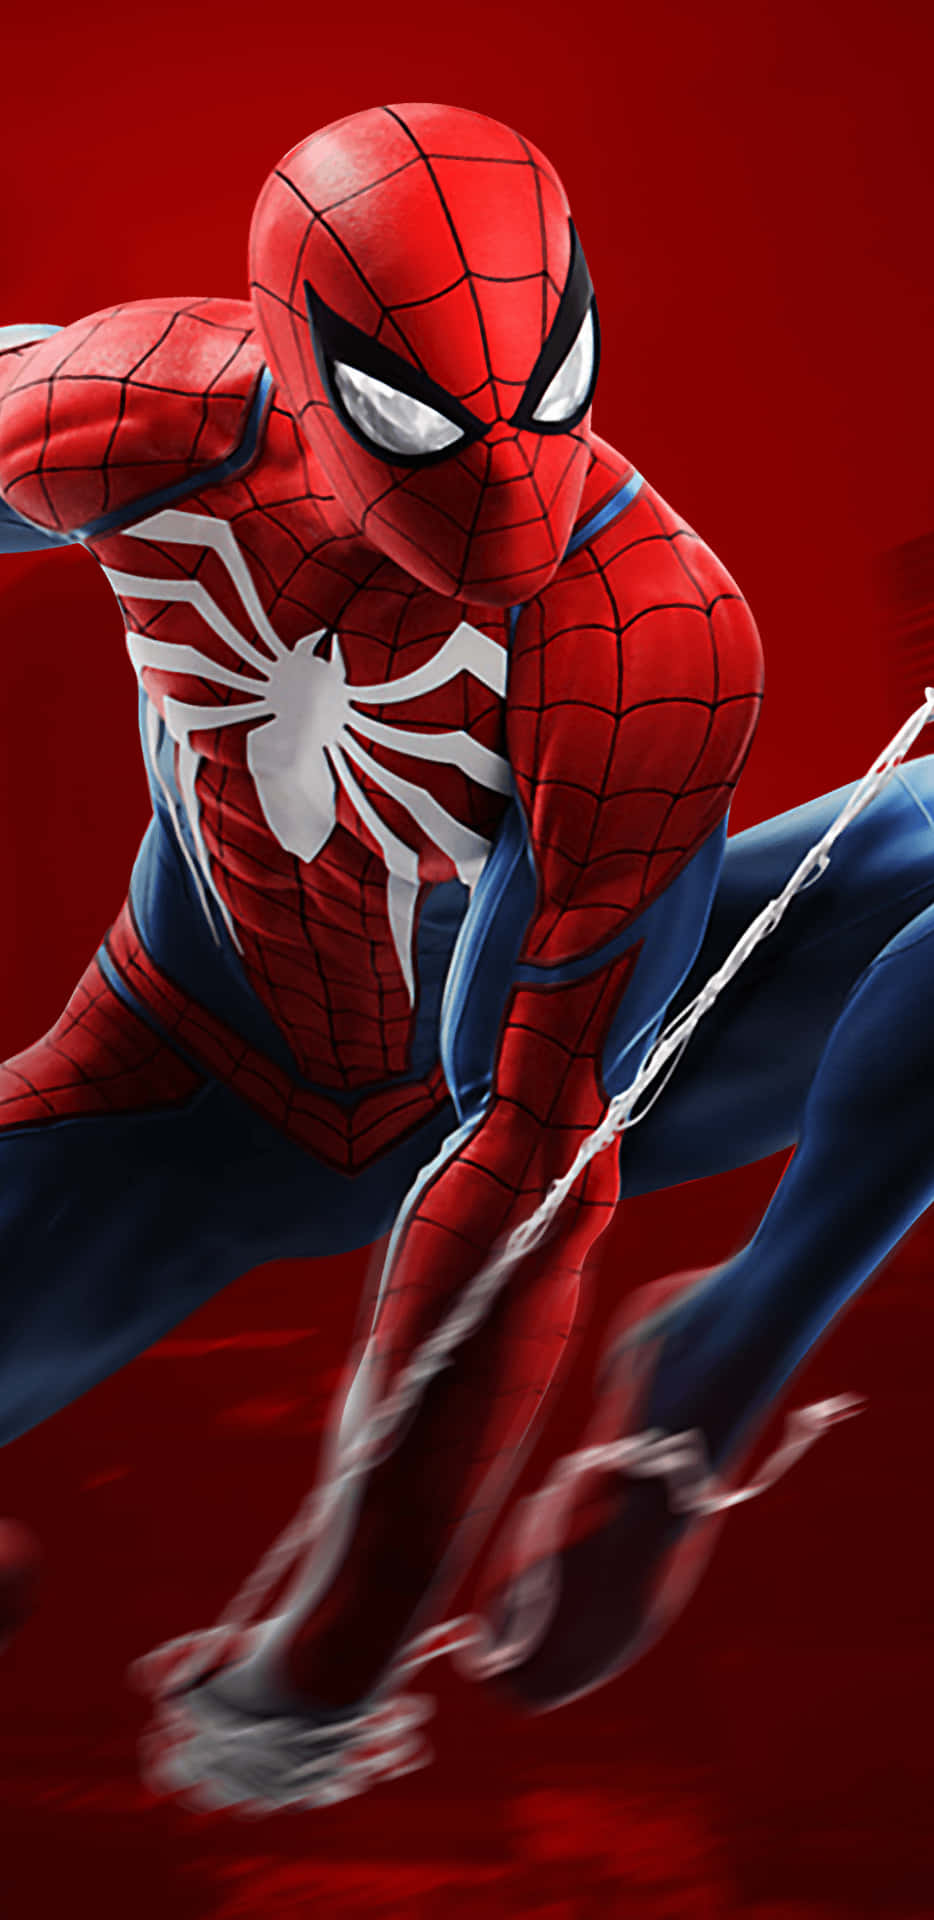 Feel The Cool Breeze Of The City With Spider-man Background